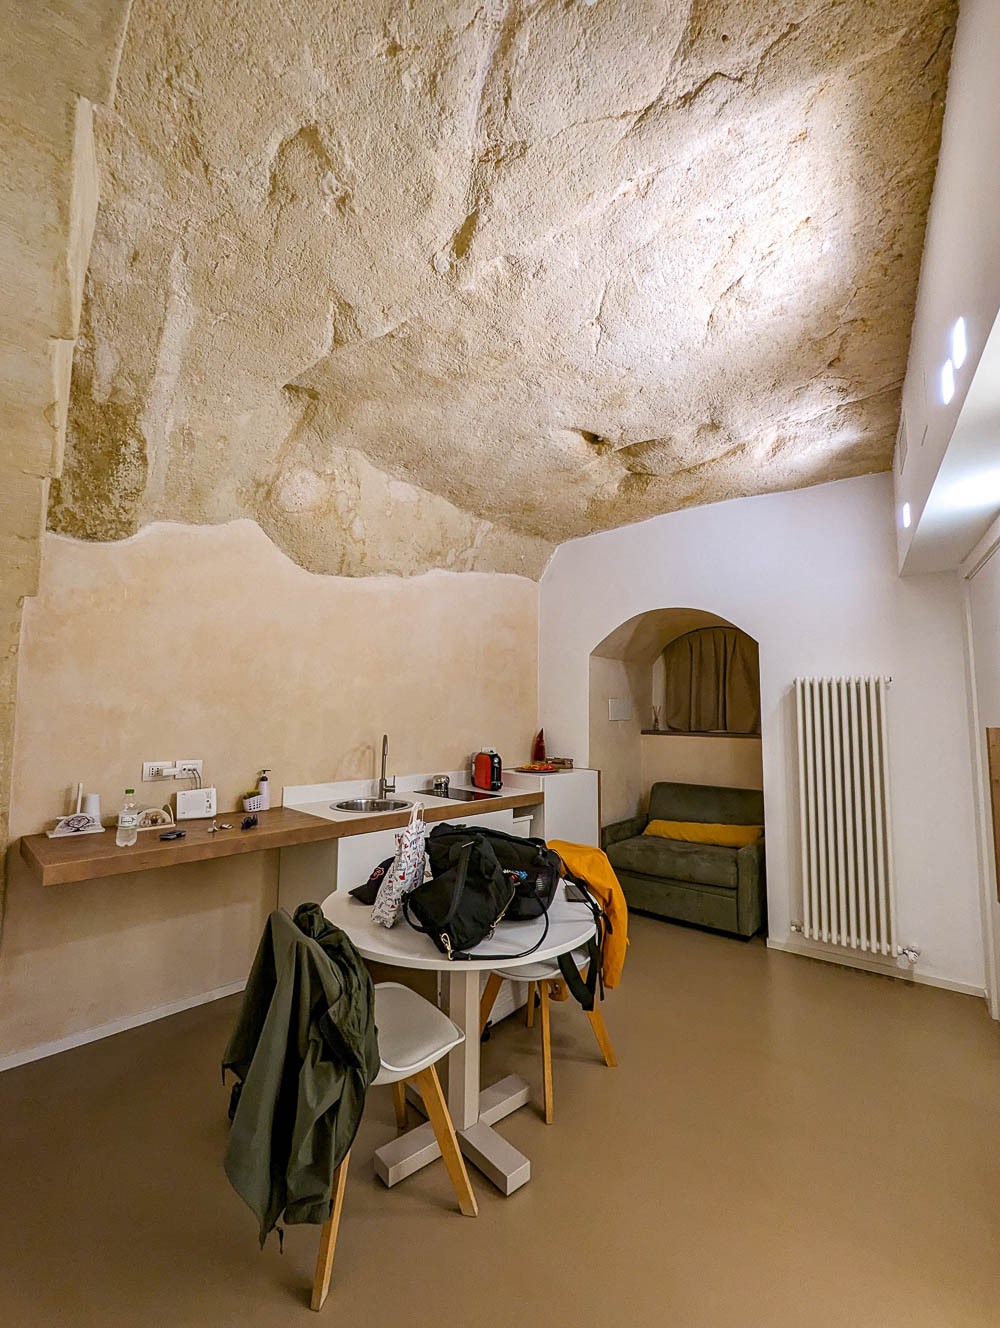 kitchen room with a cave ceiling